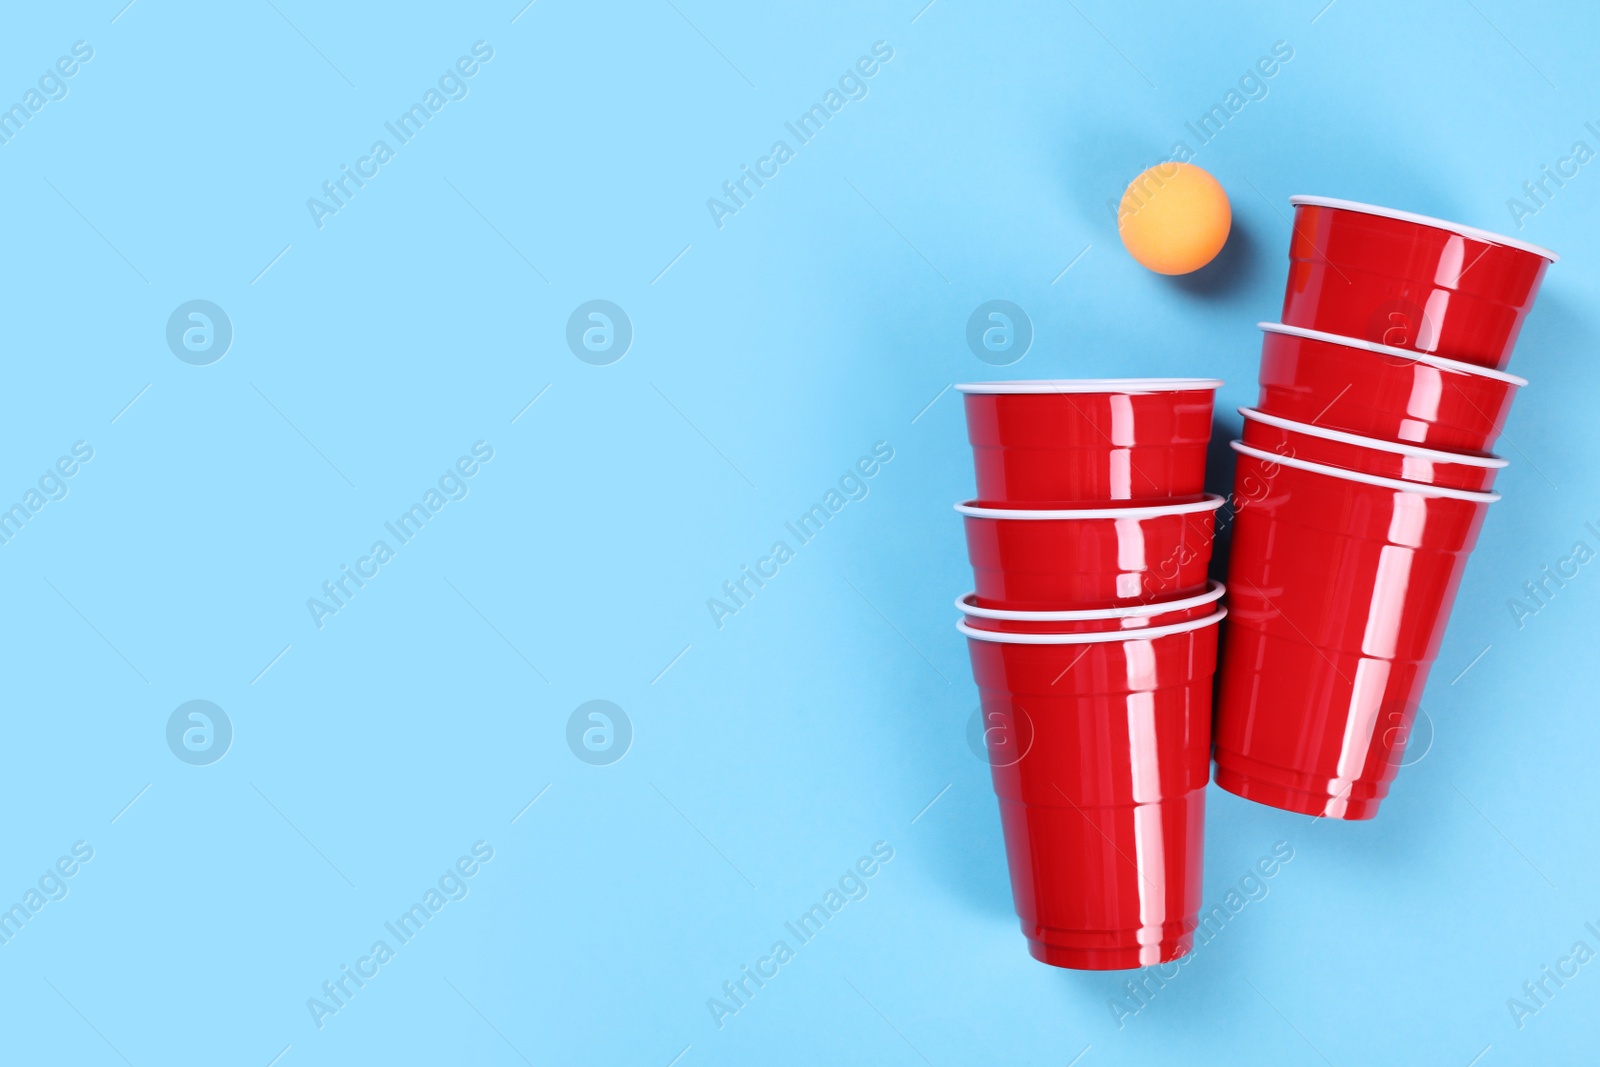 Photo of Plastic cups and ball on light blue background, flat lay with space for text. Beer pong game